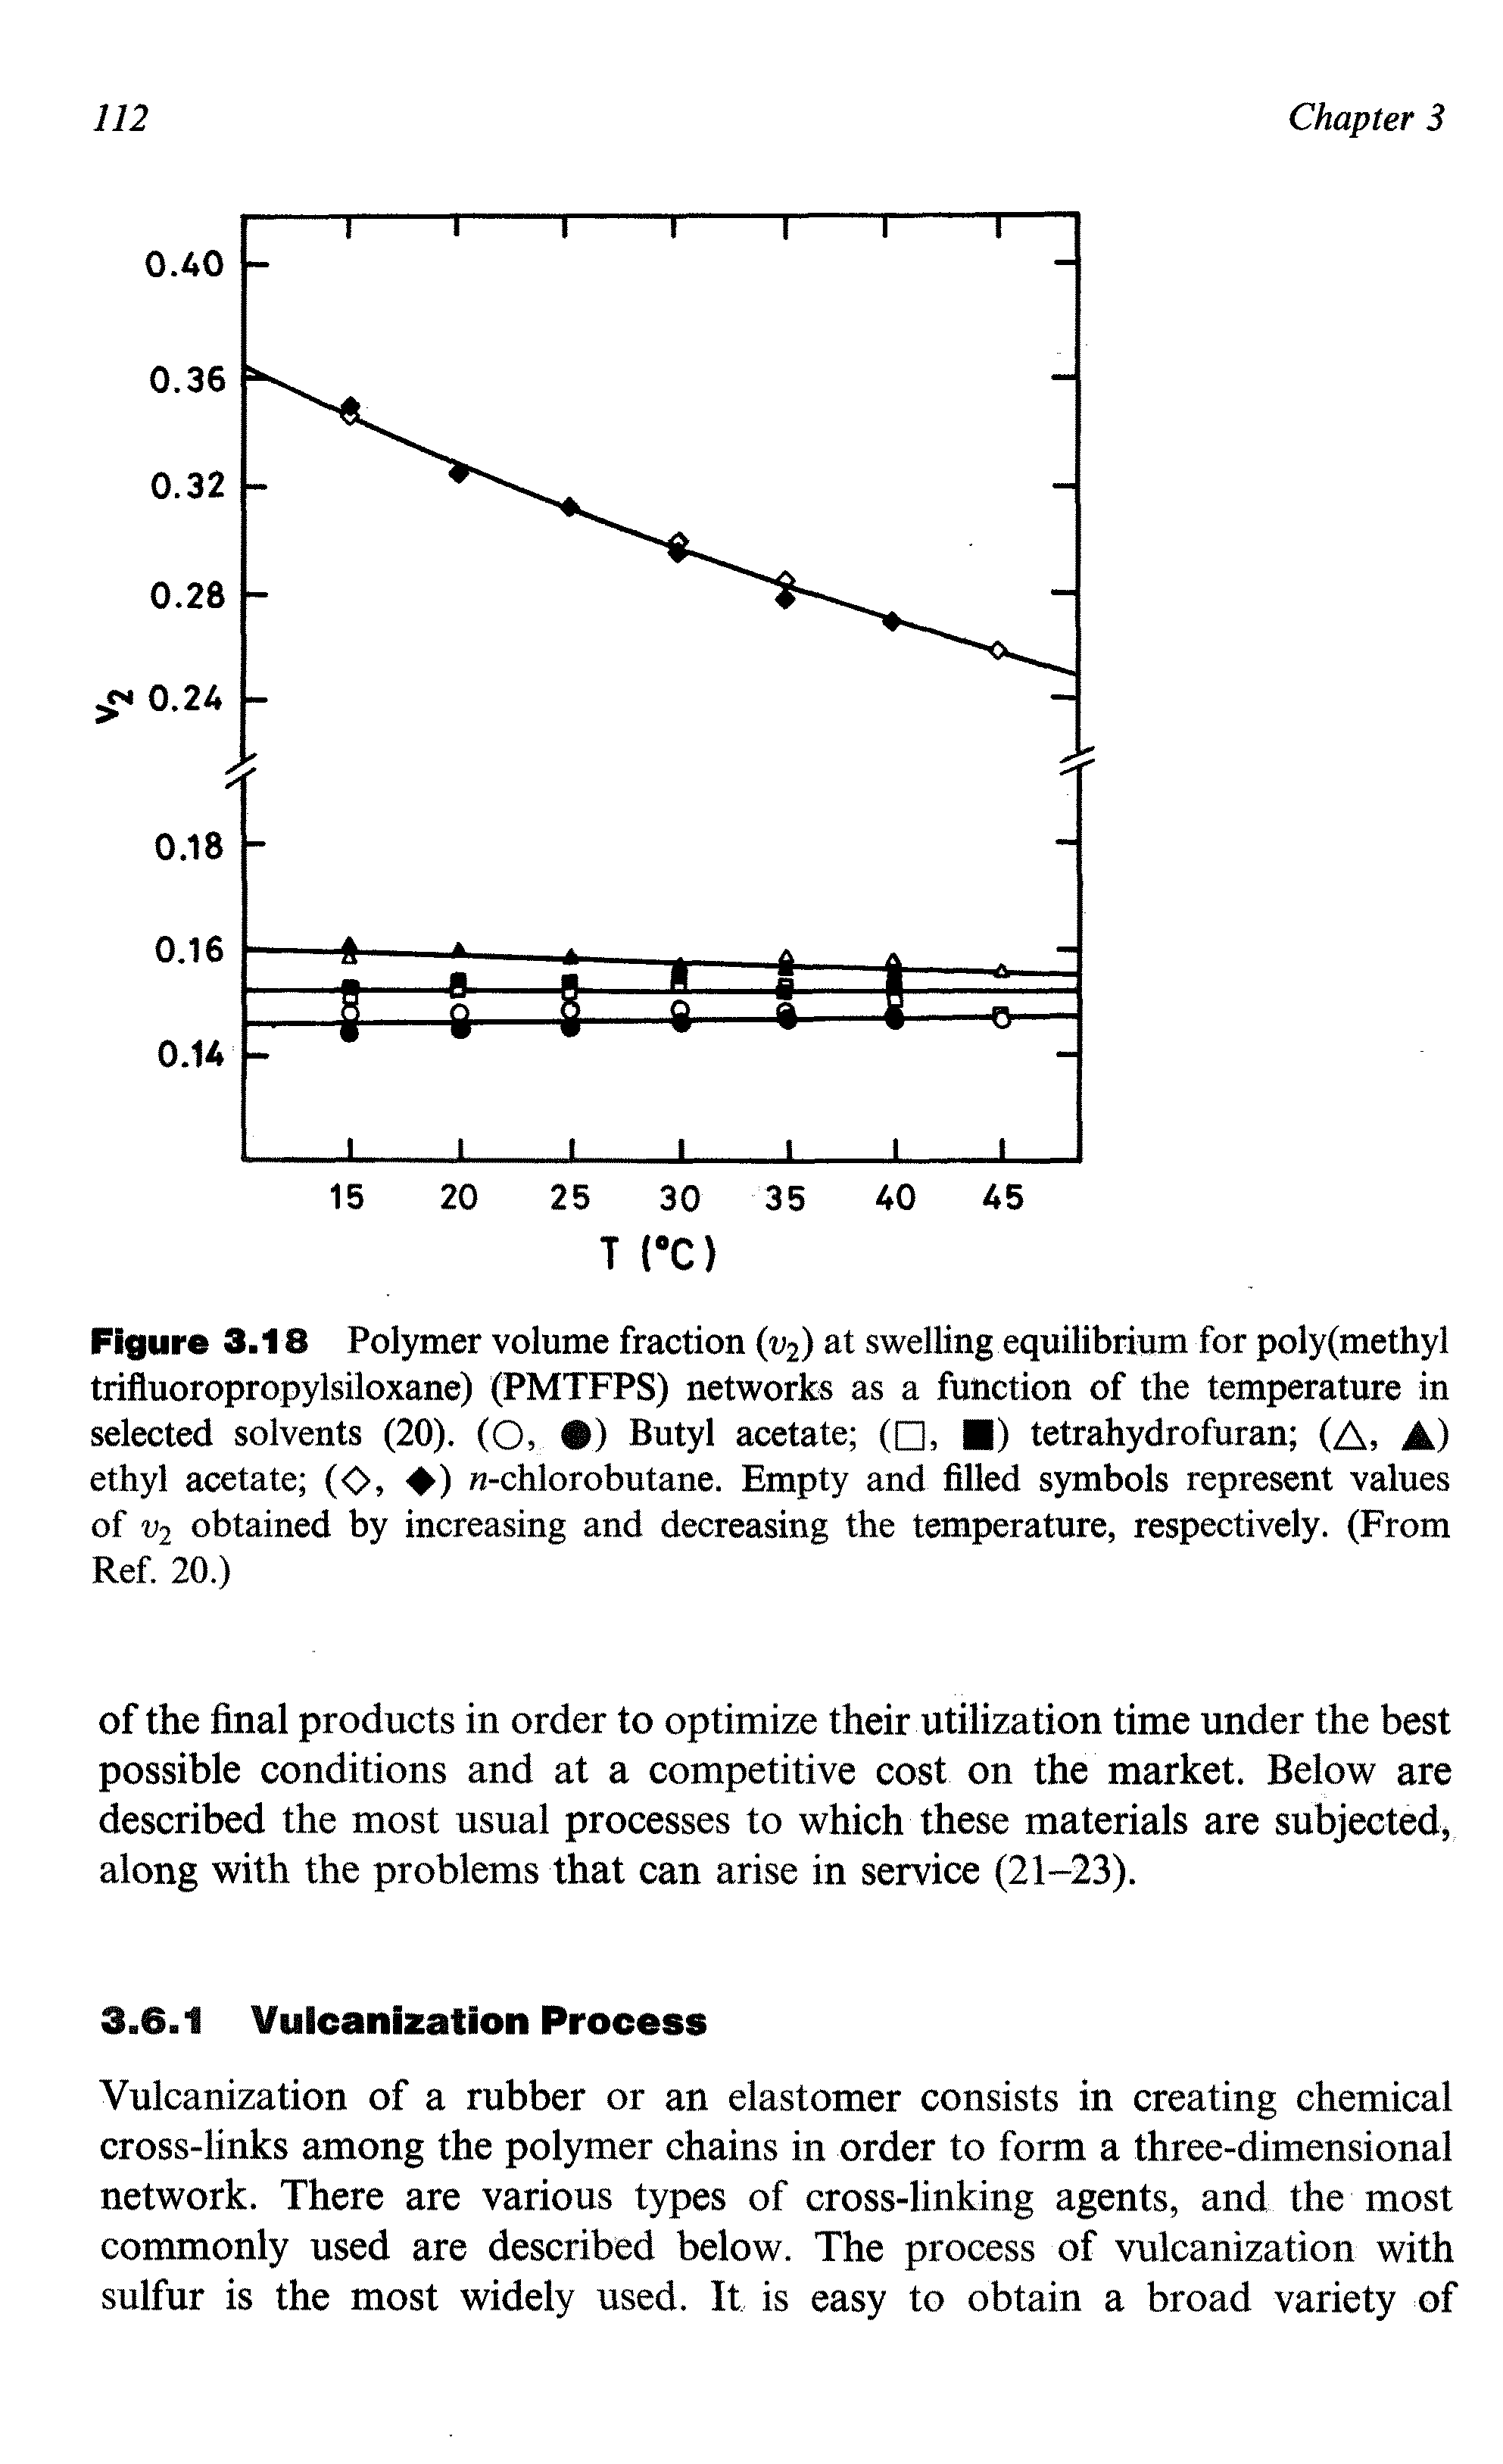 Figure 3.18 Polymer volume fraction (V2) at swelling equilibrium for poly(methyl trifluoropropylsiloxane) (PMTFPS) networks as a function of the temperature in selected solvents (20). (O, ) Butyl acetate ( , ) tetrahydrofuran (A, A) ethyl acetate (O, ) -chlorobutane. Empty and filled symbols represent values of V2 obtained by increasing and decreasing the temperature, respectively. (From Ref. 20.)...